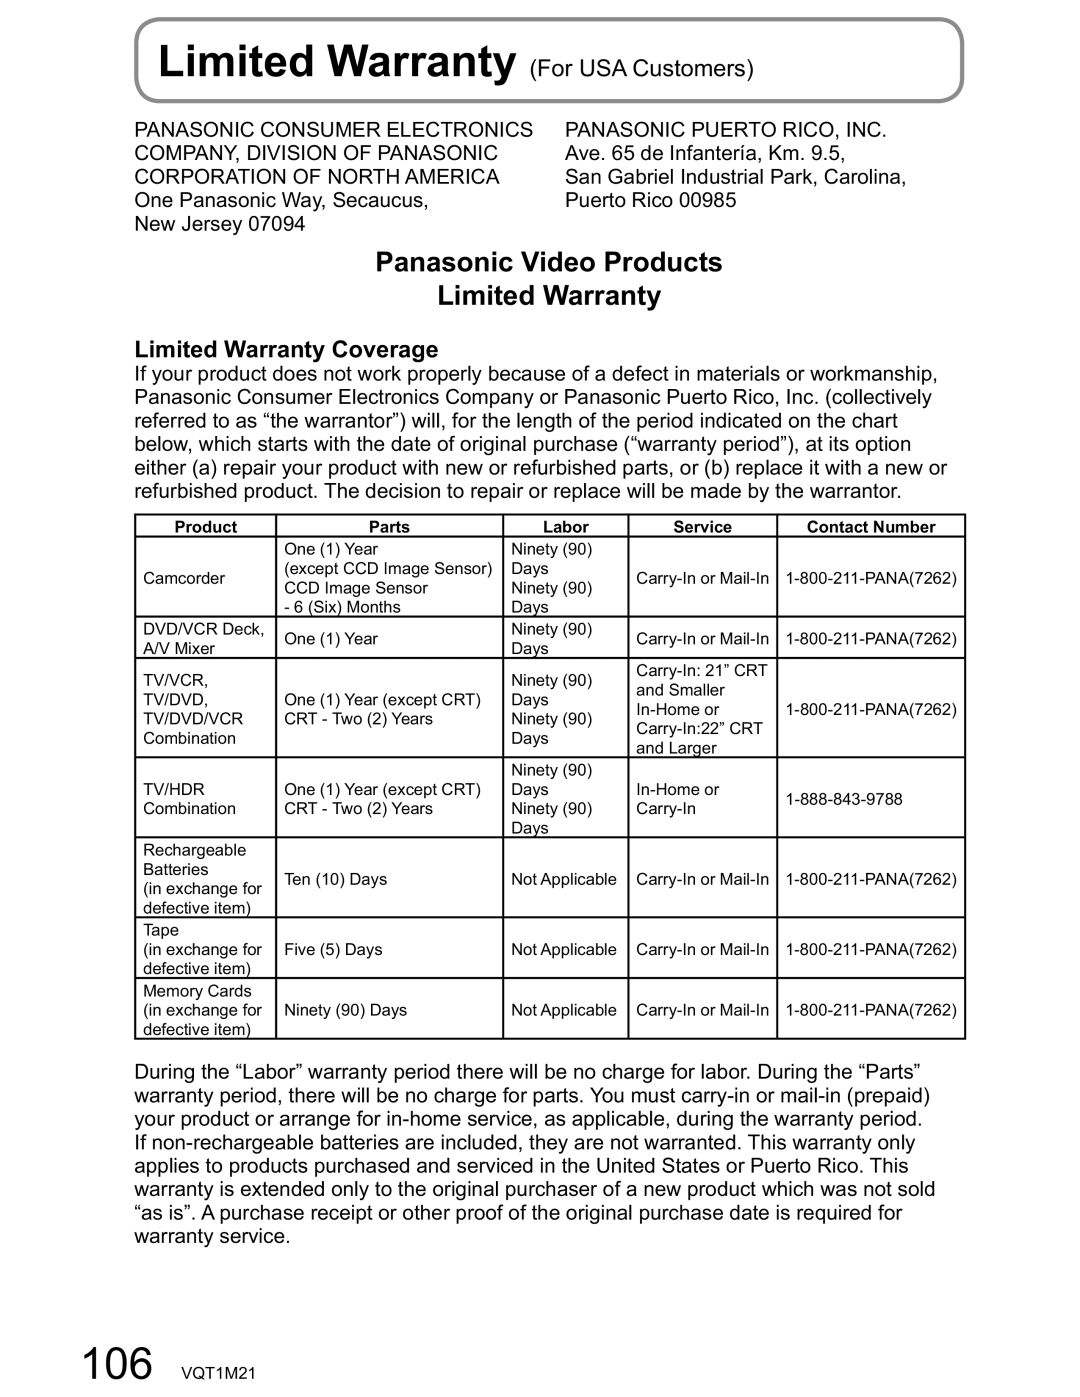 Panasonic SDR-SW20PC operating instructions Panasonic Video Products Limited Warranty, Limited Warranty For USA Customers 